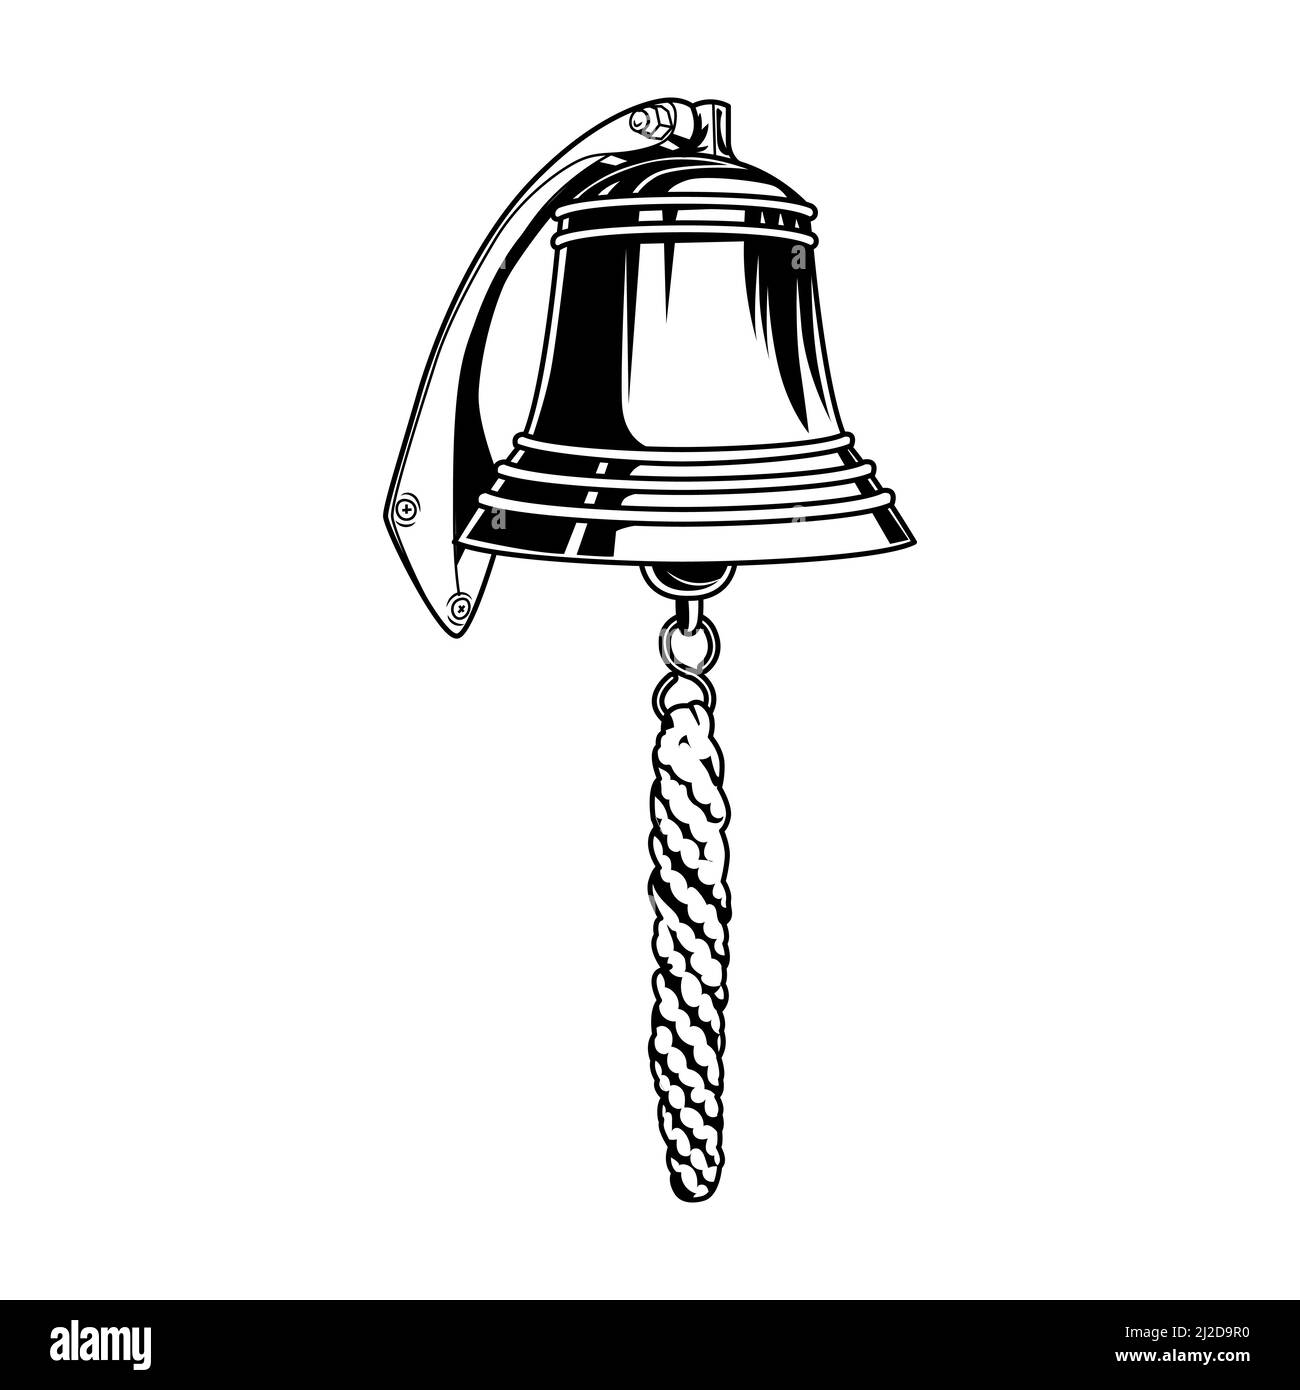 Nautical bell vector illustration. Vintage monochrome brass bell with rope. Sailing or maritime navigation concept for labels or emblems templates Stock Vector